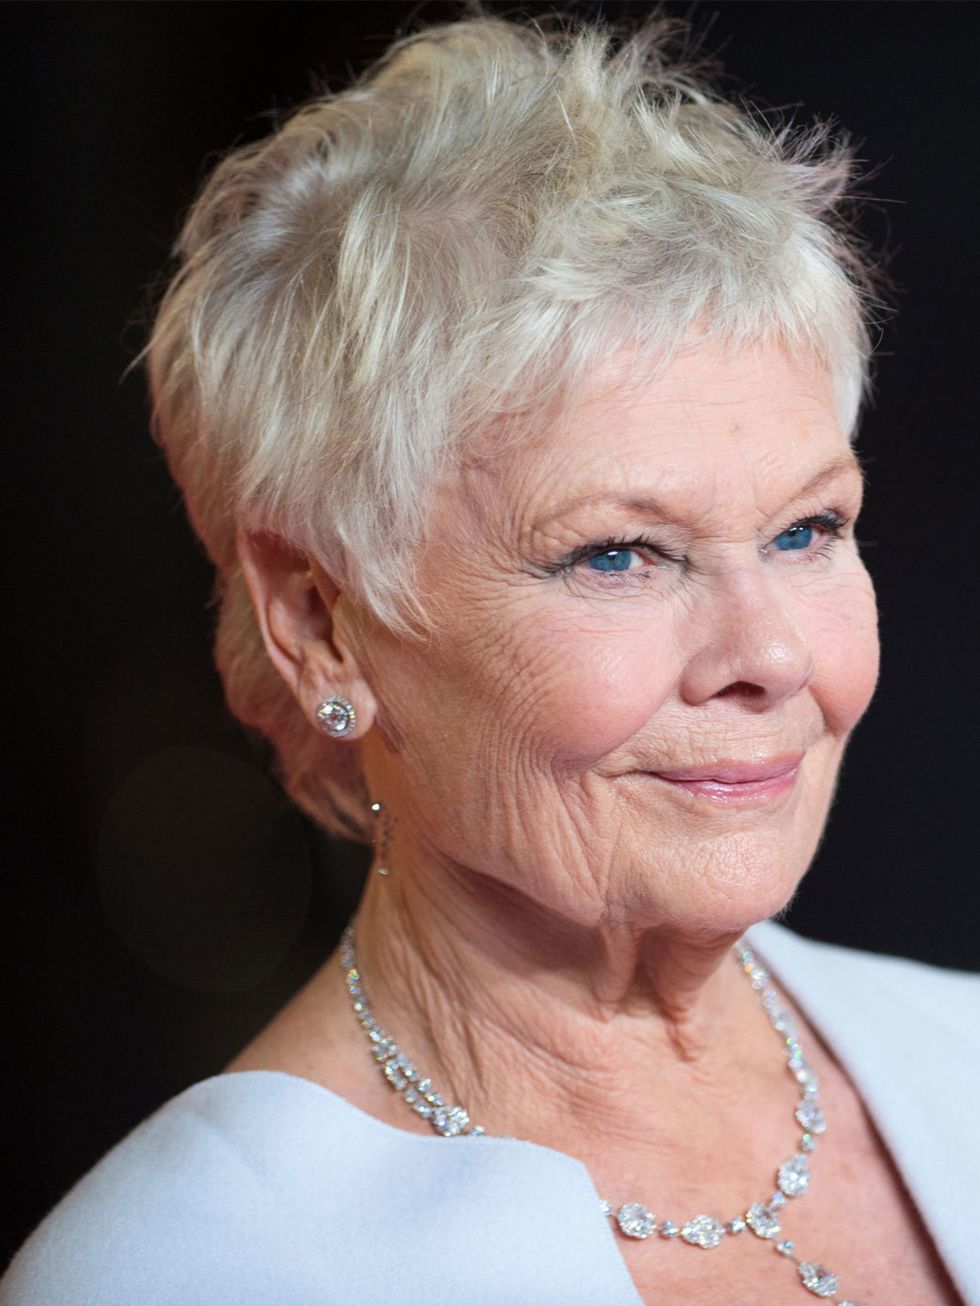 <p><strong>Dame Judi Dench</strong></p><p><a href="http://www.elleuk.com/star-style/celebrity-fashion-trends/bafta-nominees-2013">Judi</a> was unforgettable as Queen Elizabeth I in <em>Shakespeare in Love</em>. But then, being unforgettable is something s